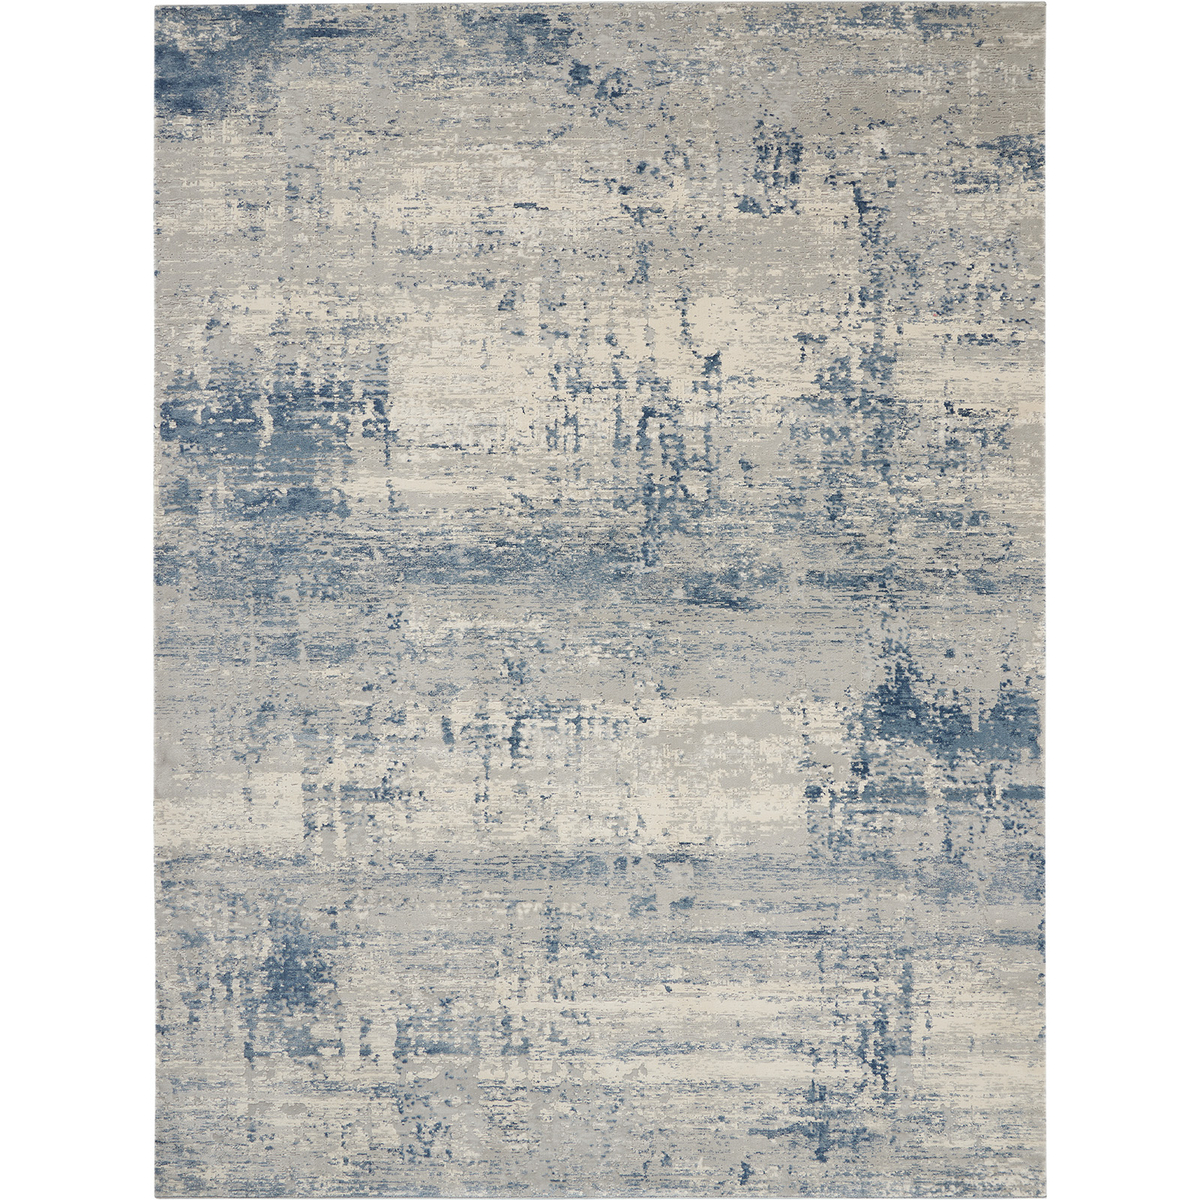 Rustic Textures Rug, Blue